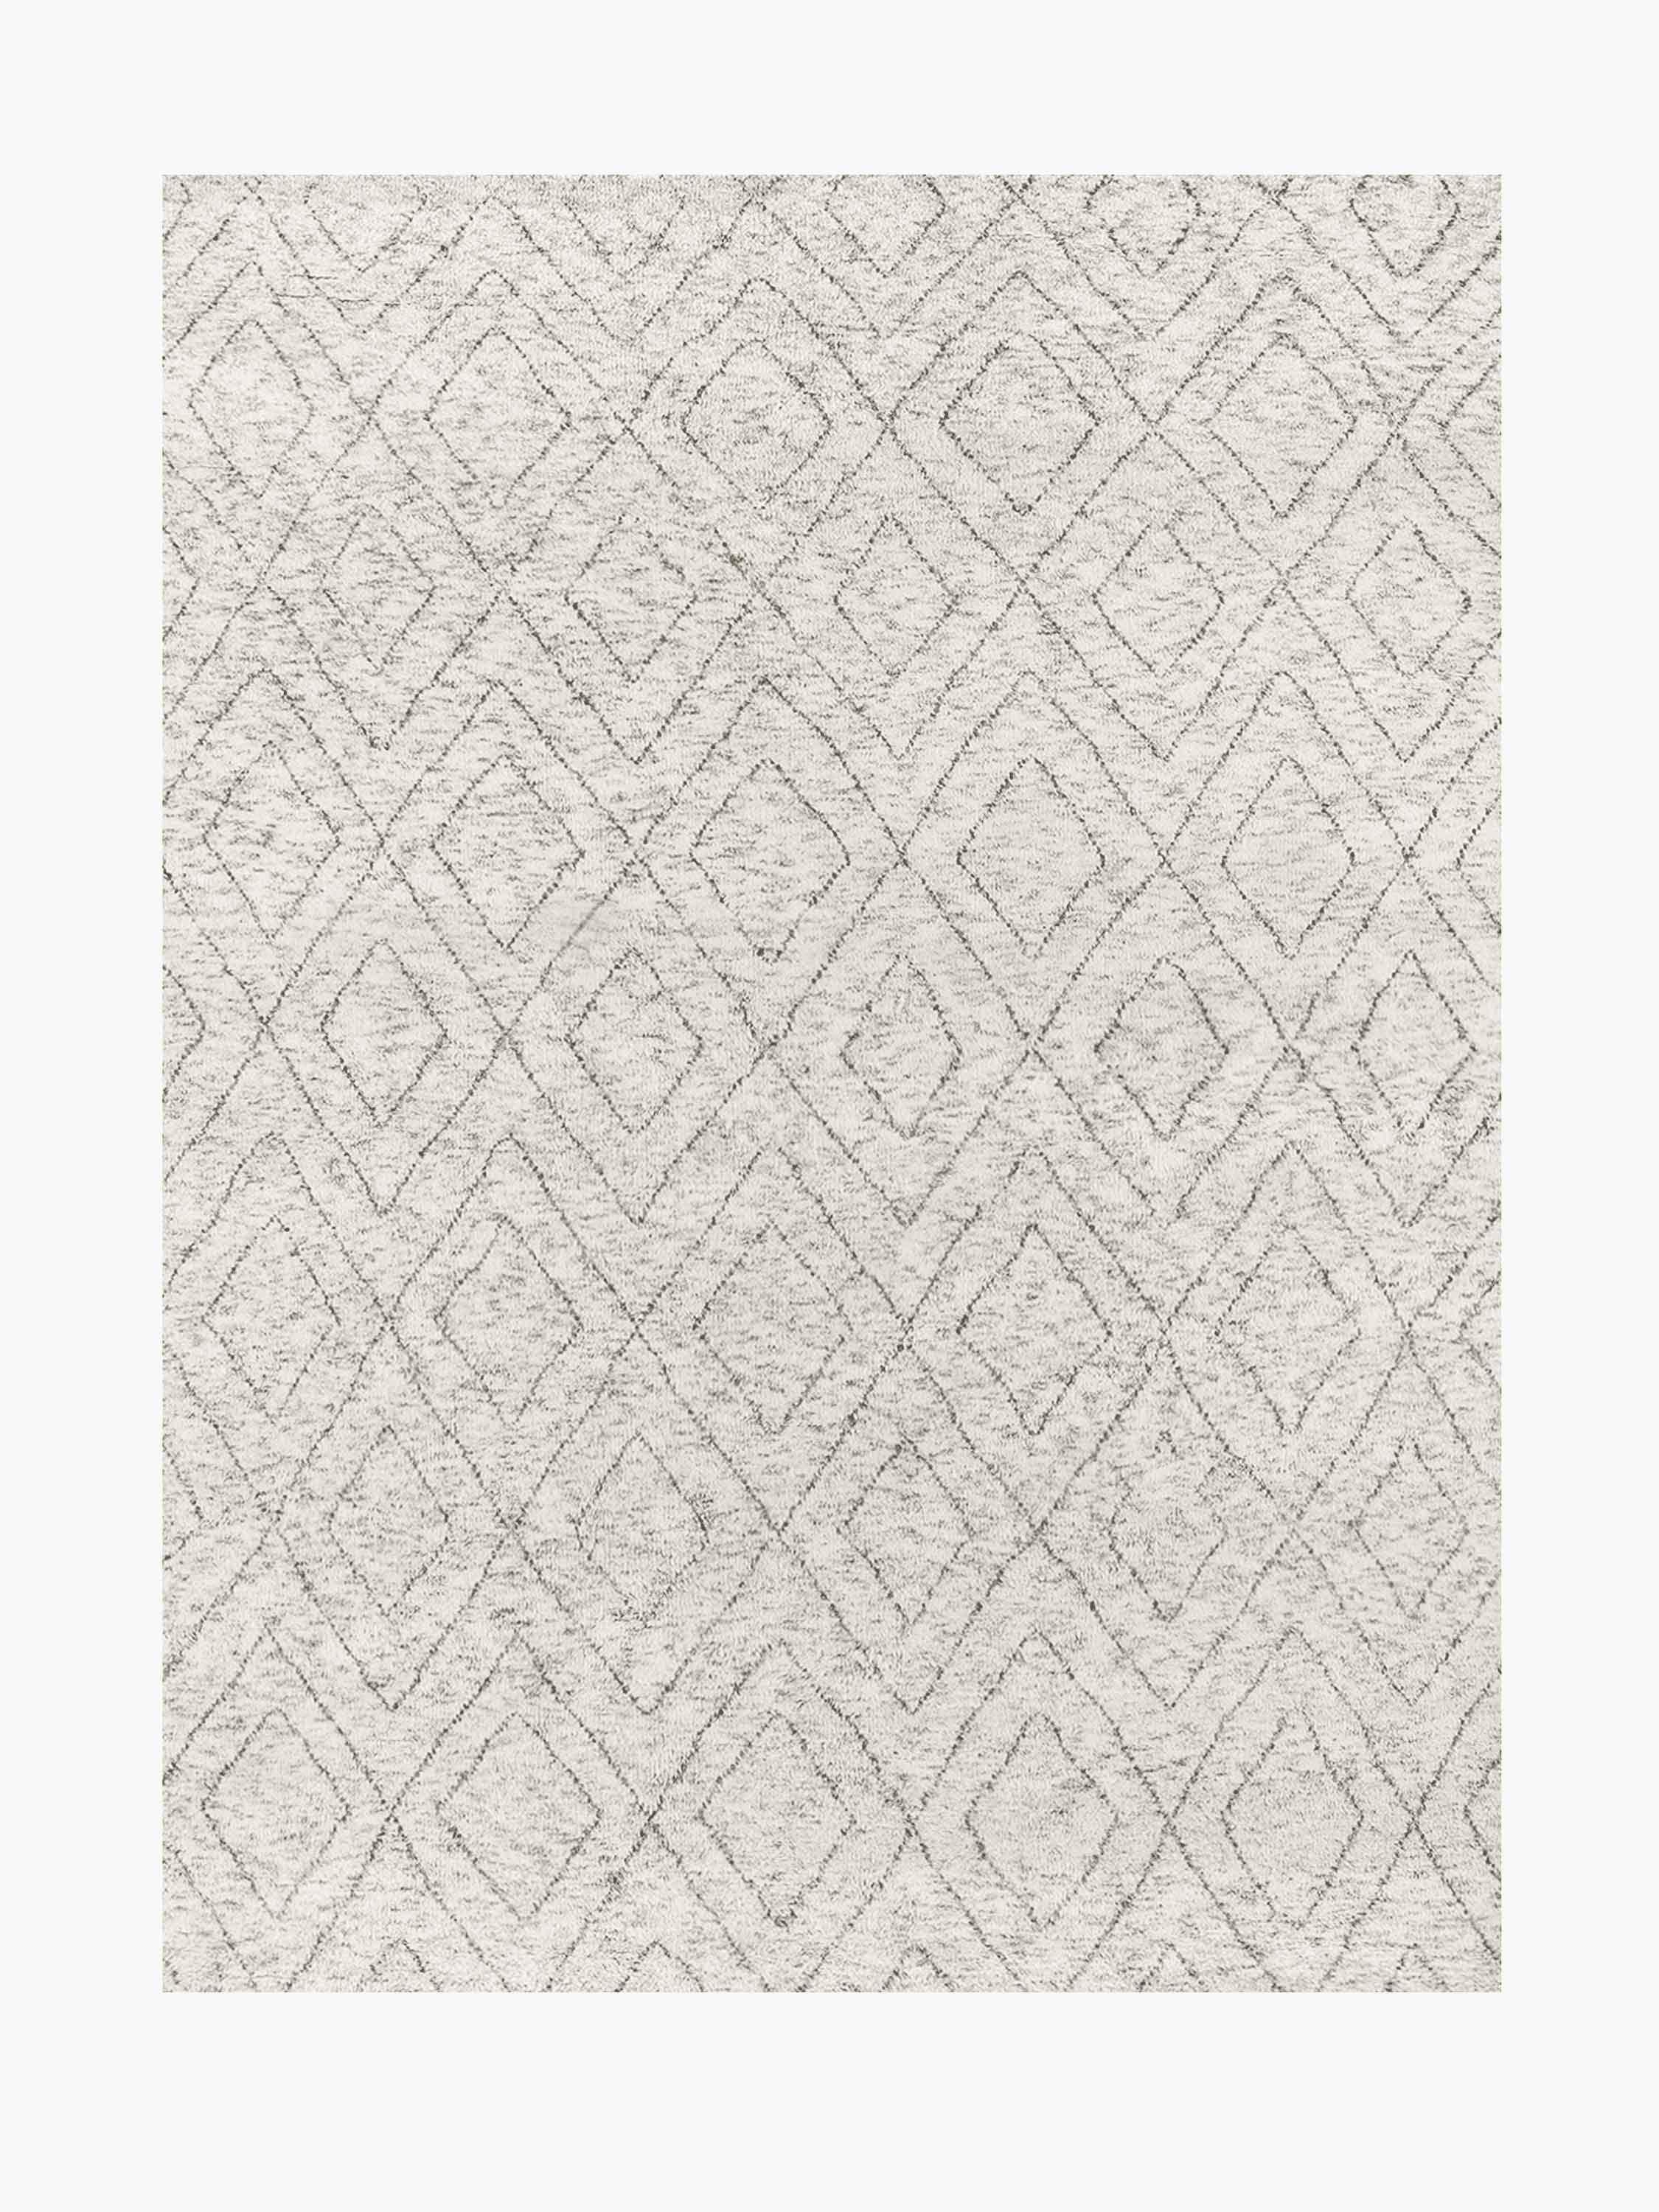 For Sale: Silver Ben Soleimani Double Diamond Rug– Moroccan Hand-knotted Wool Grey 6'x9'